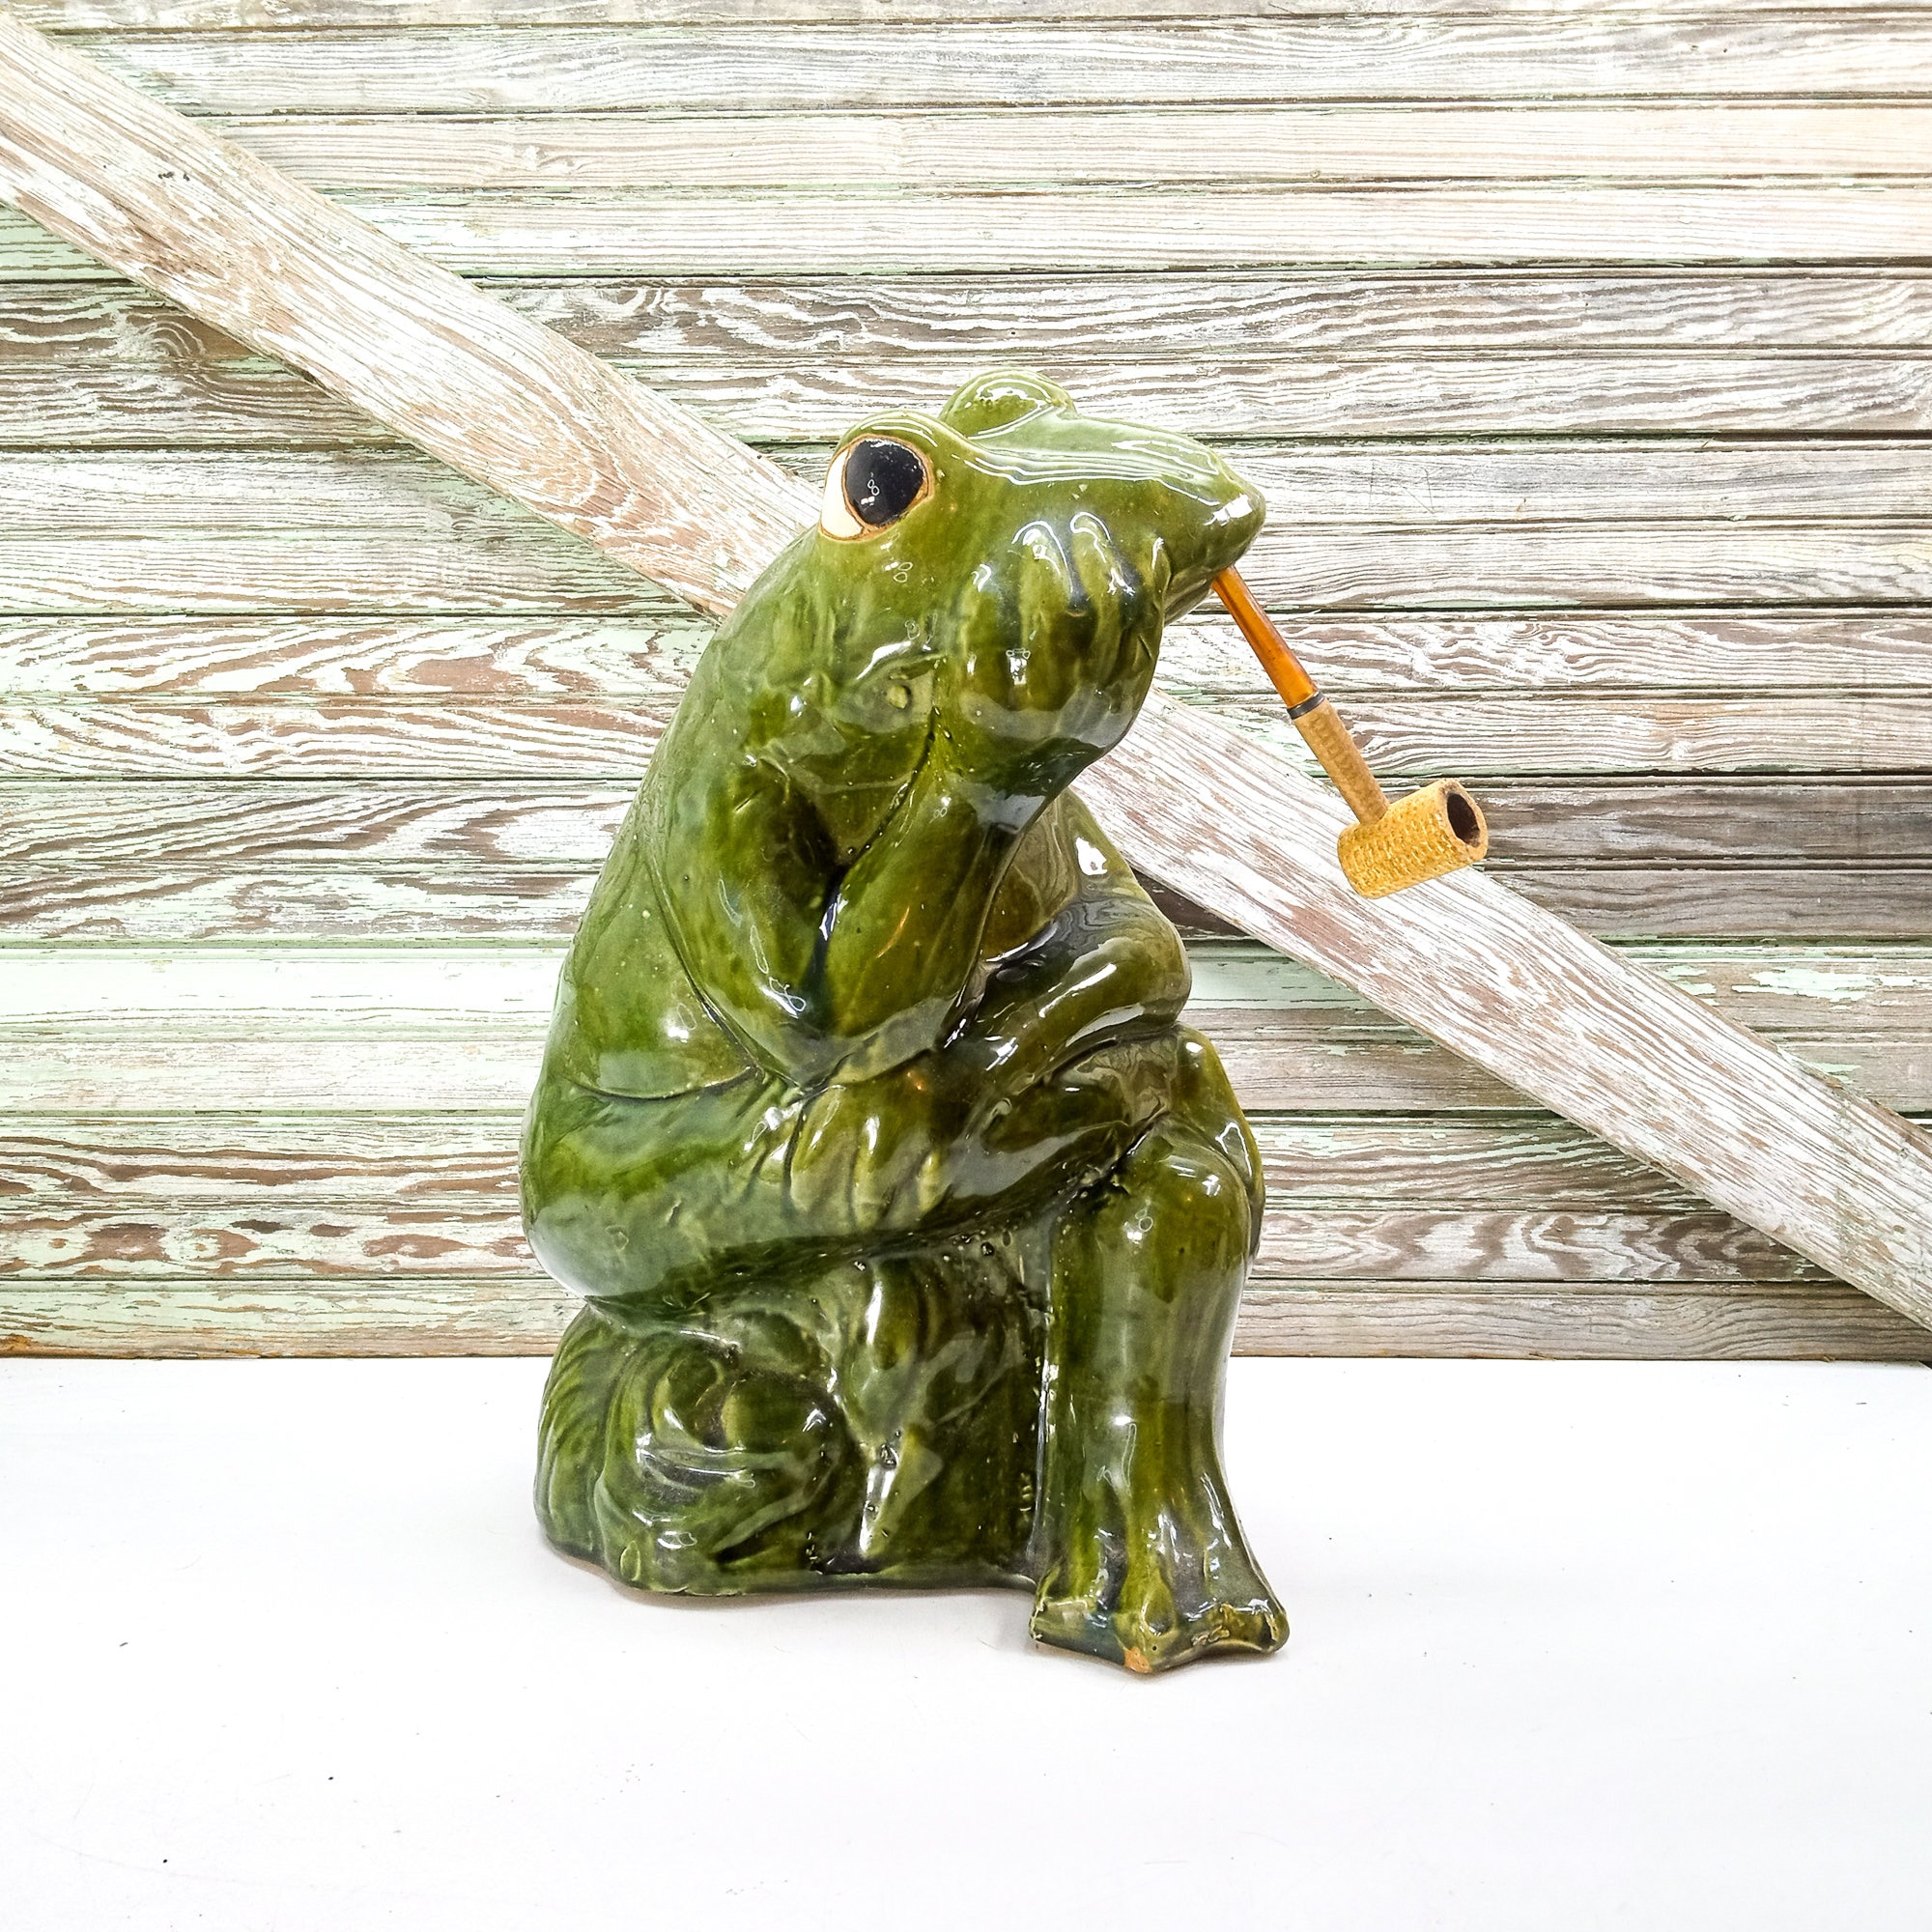 Large Vintage Ceramic Frog Statue Smoking a Corn Cob Pipe Retro Home Decor  Shabby Chic Decorative Collectible Rustic Frog Toad Thinking Man -   Canada